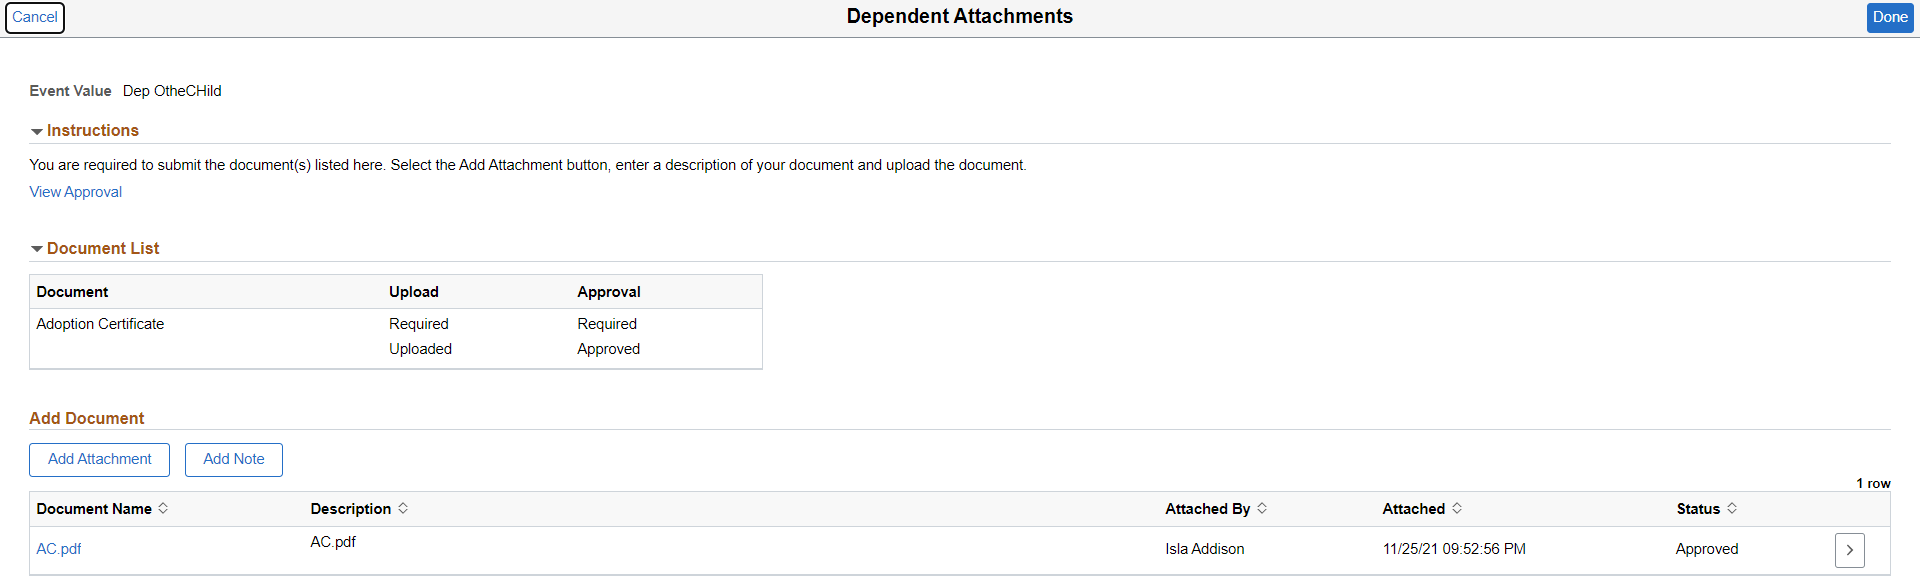 Dependent Attachments page